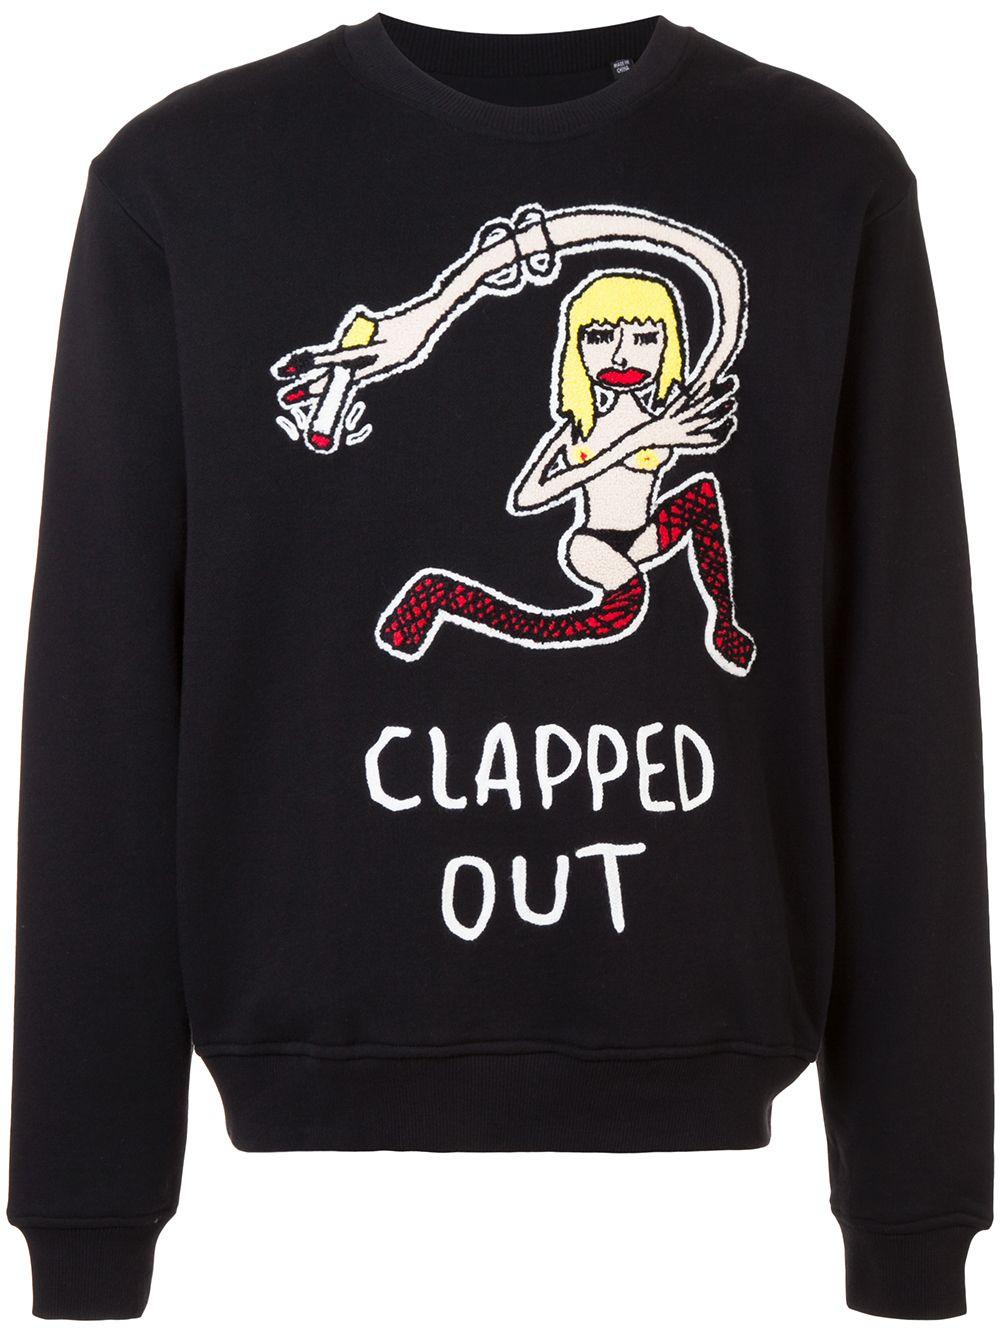 Haculla Clapped Out Crew Neck Sweatshirt in Black for Men - Lyst